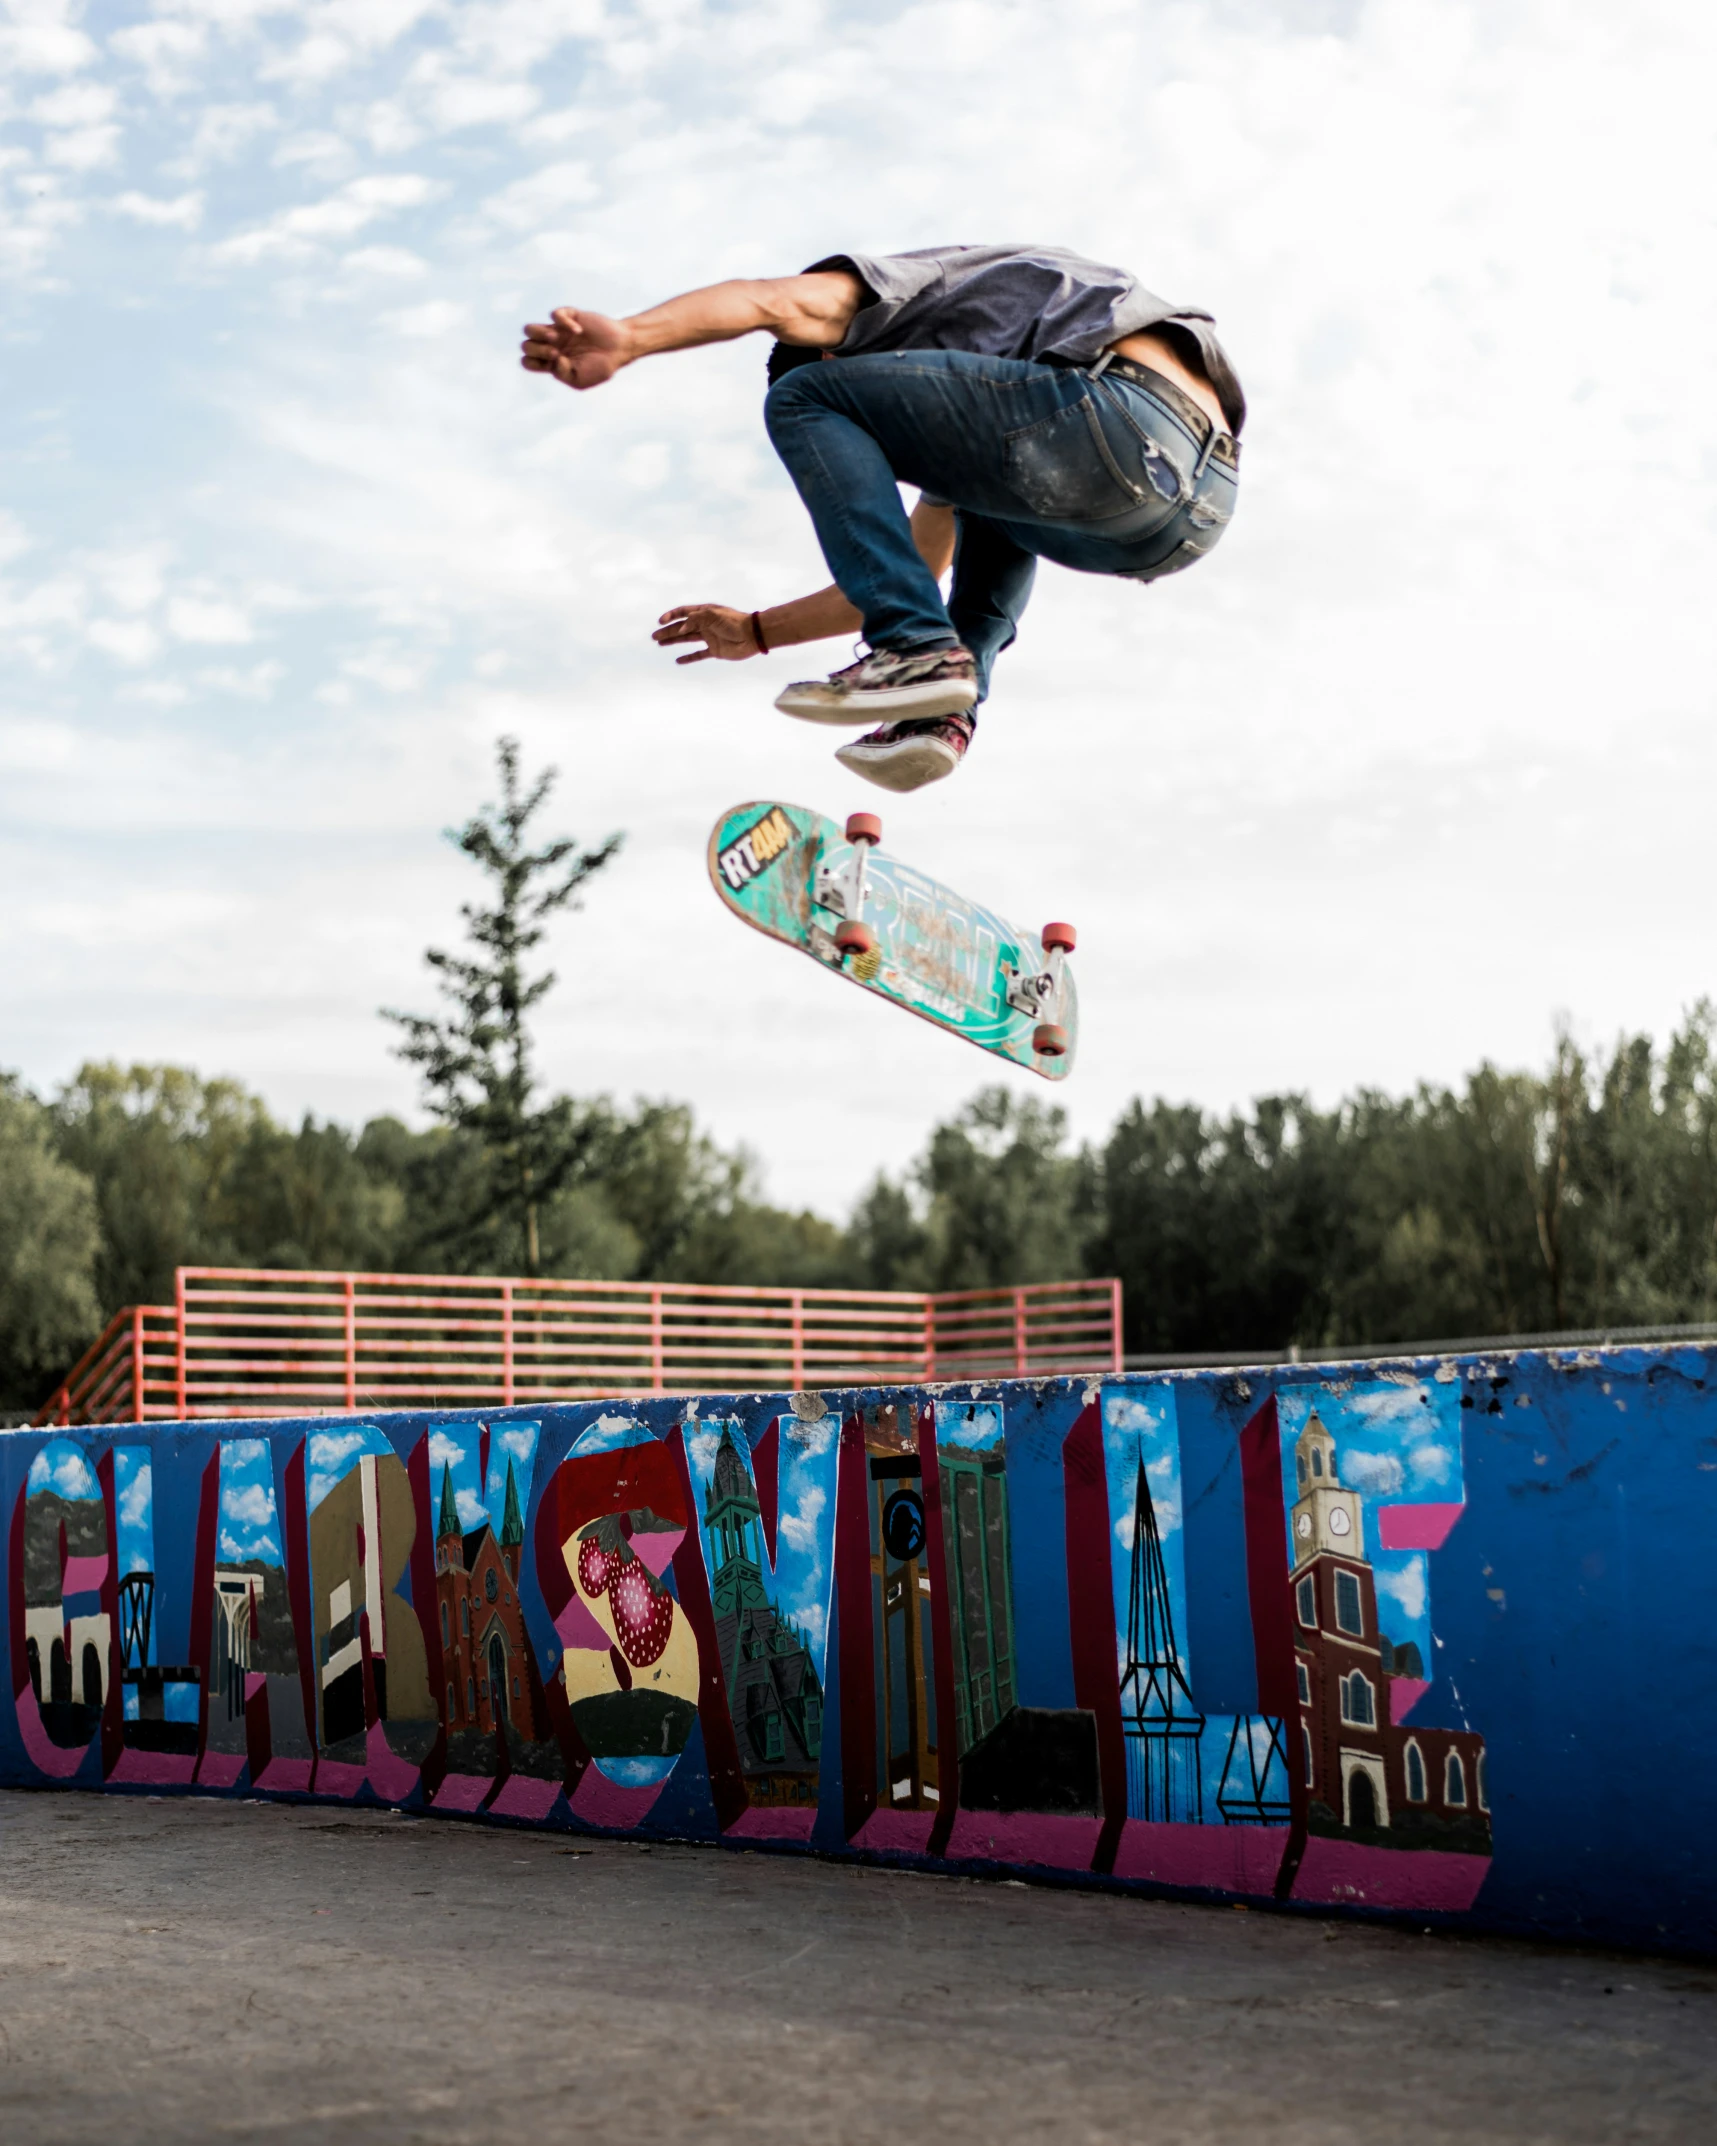 man doing skateboard trick with colorful graffiti in the air